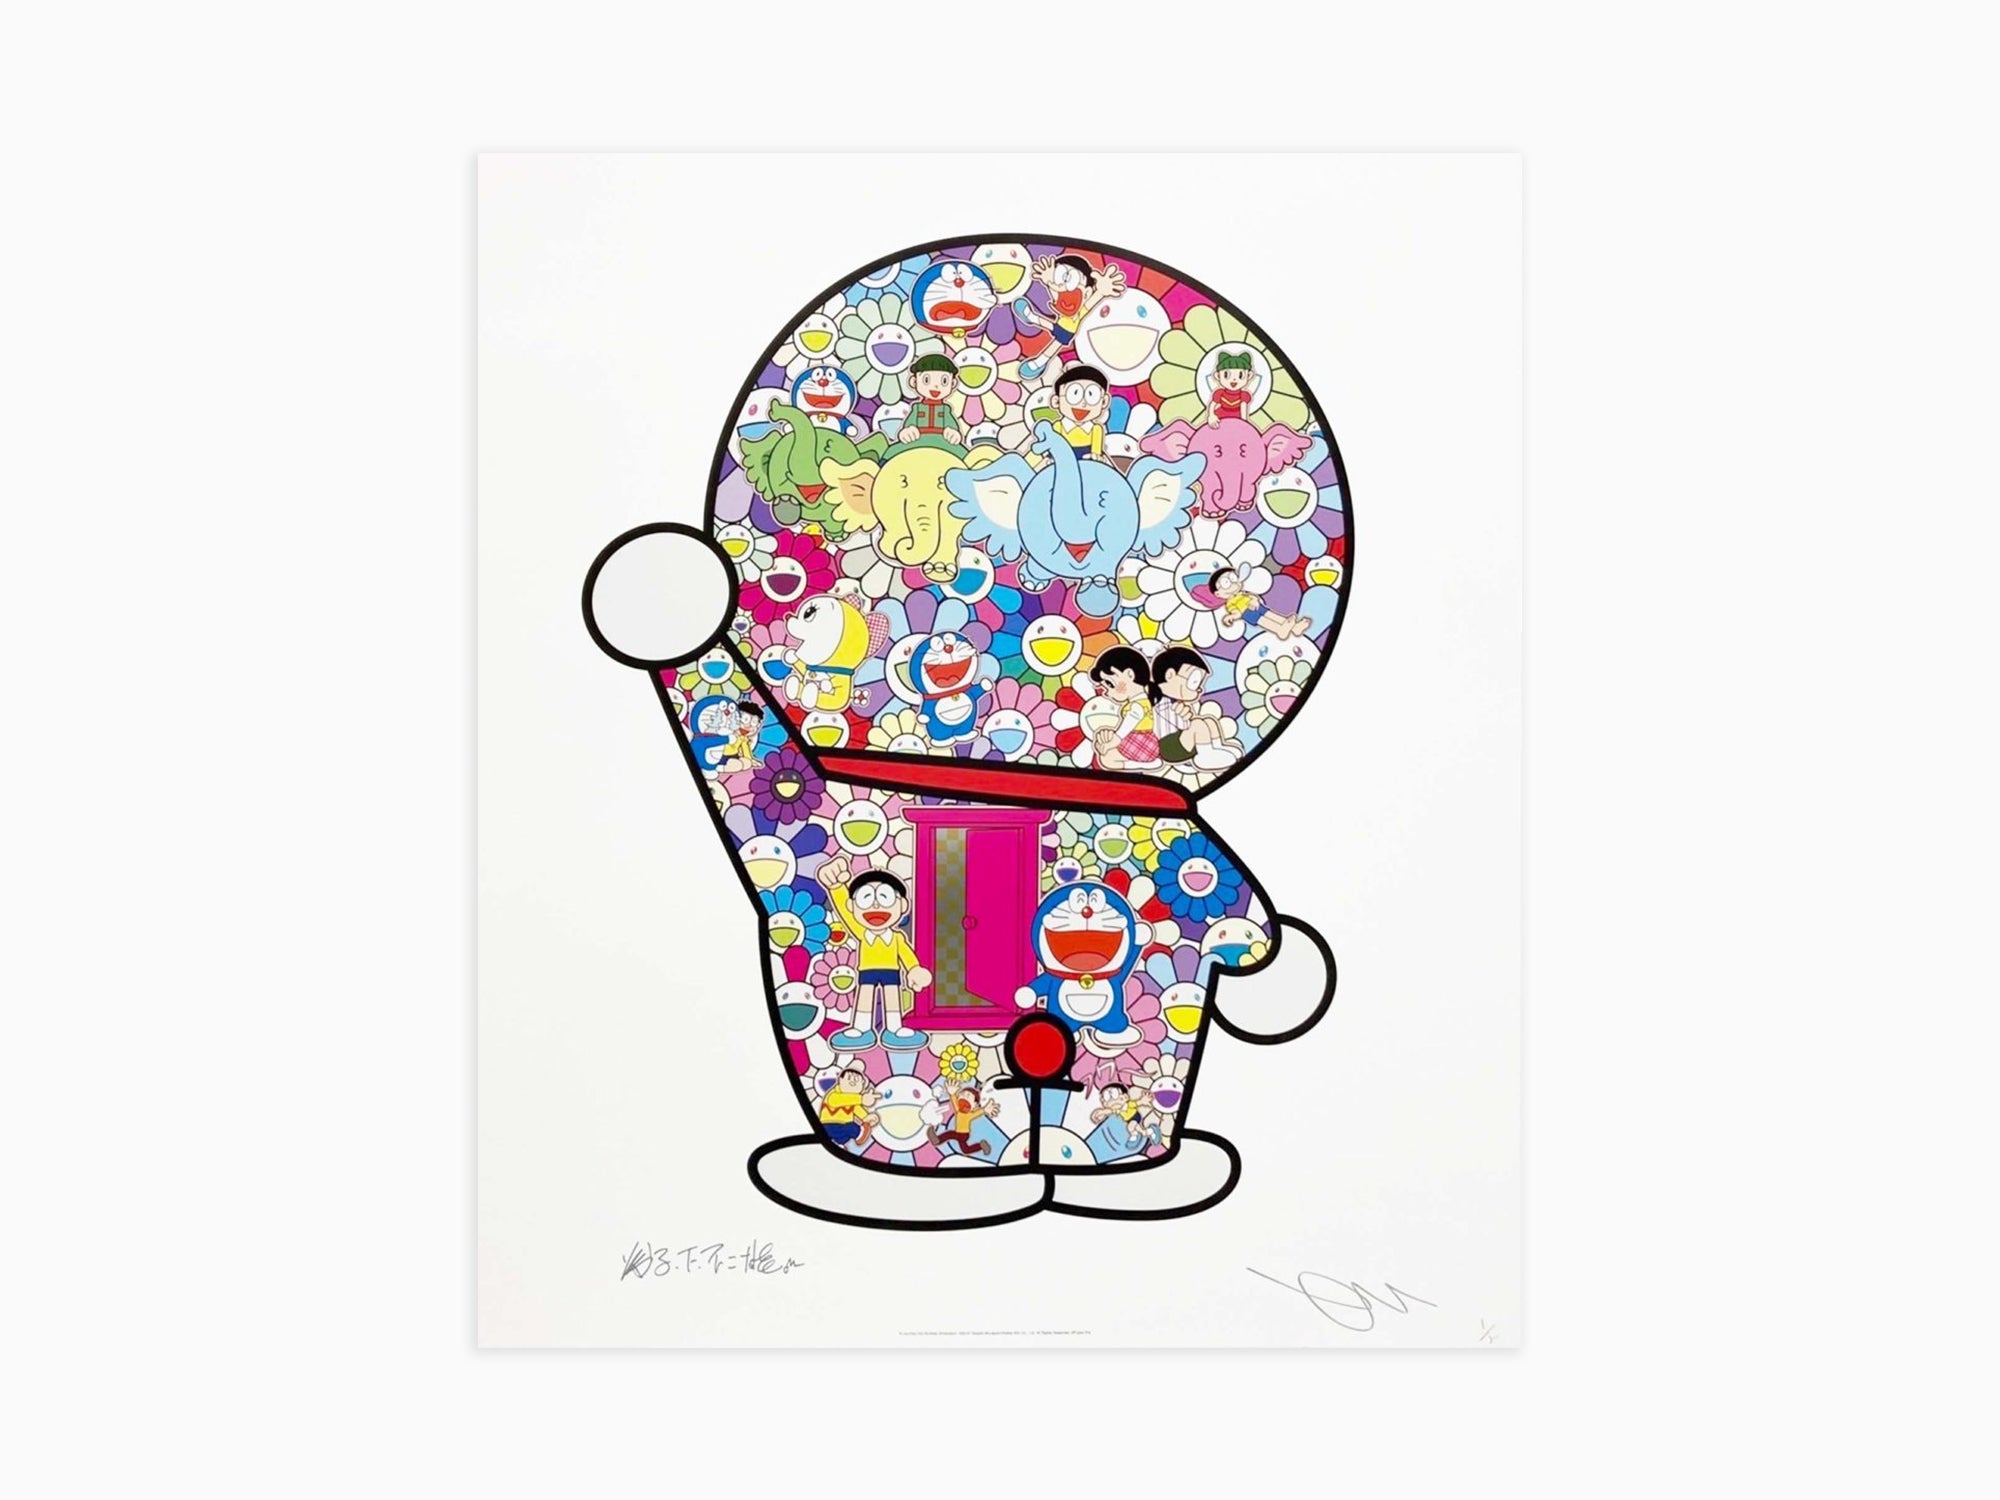 Takashi Murakami - A Journey into Another Dimension